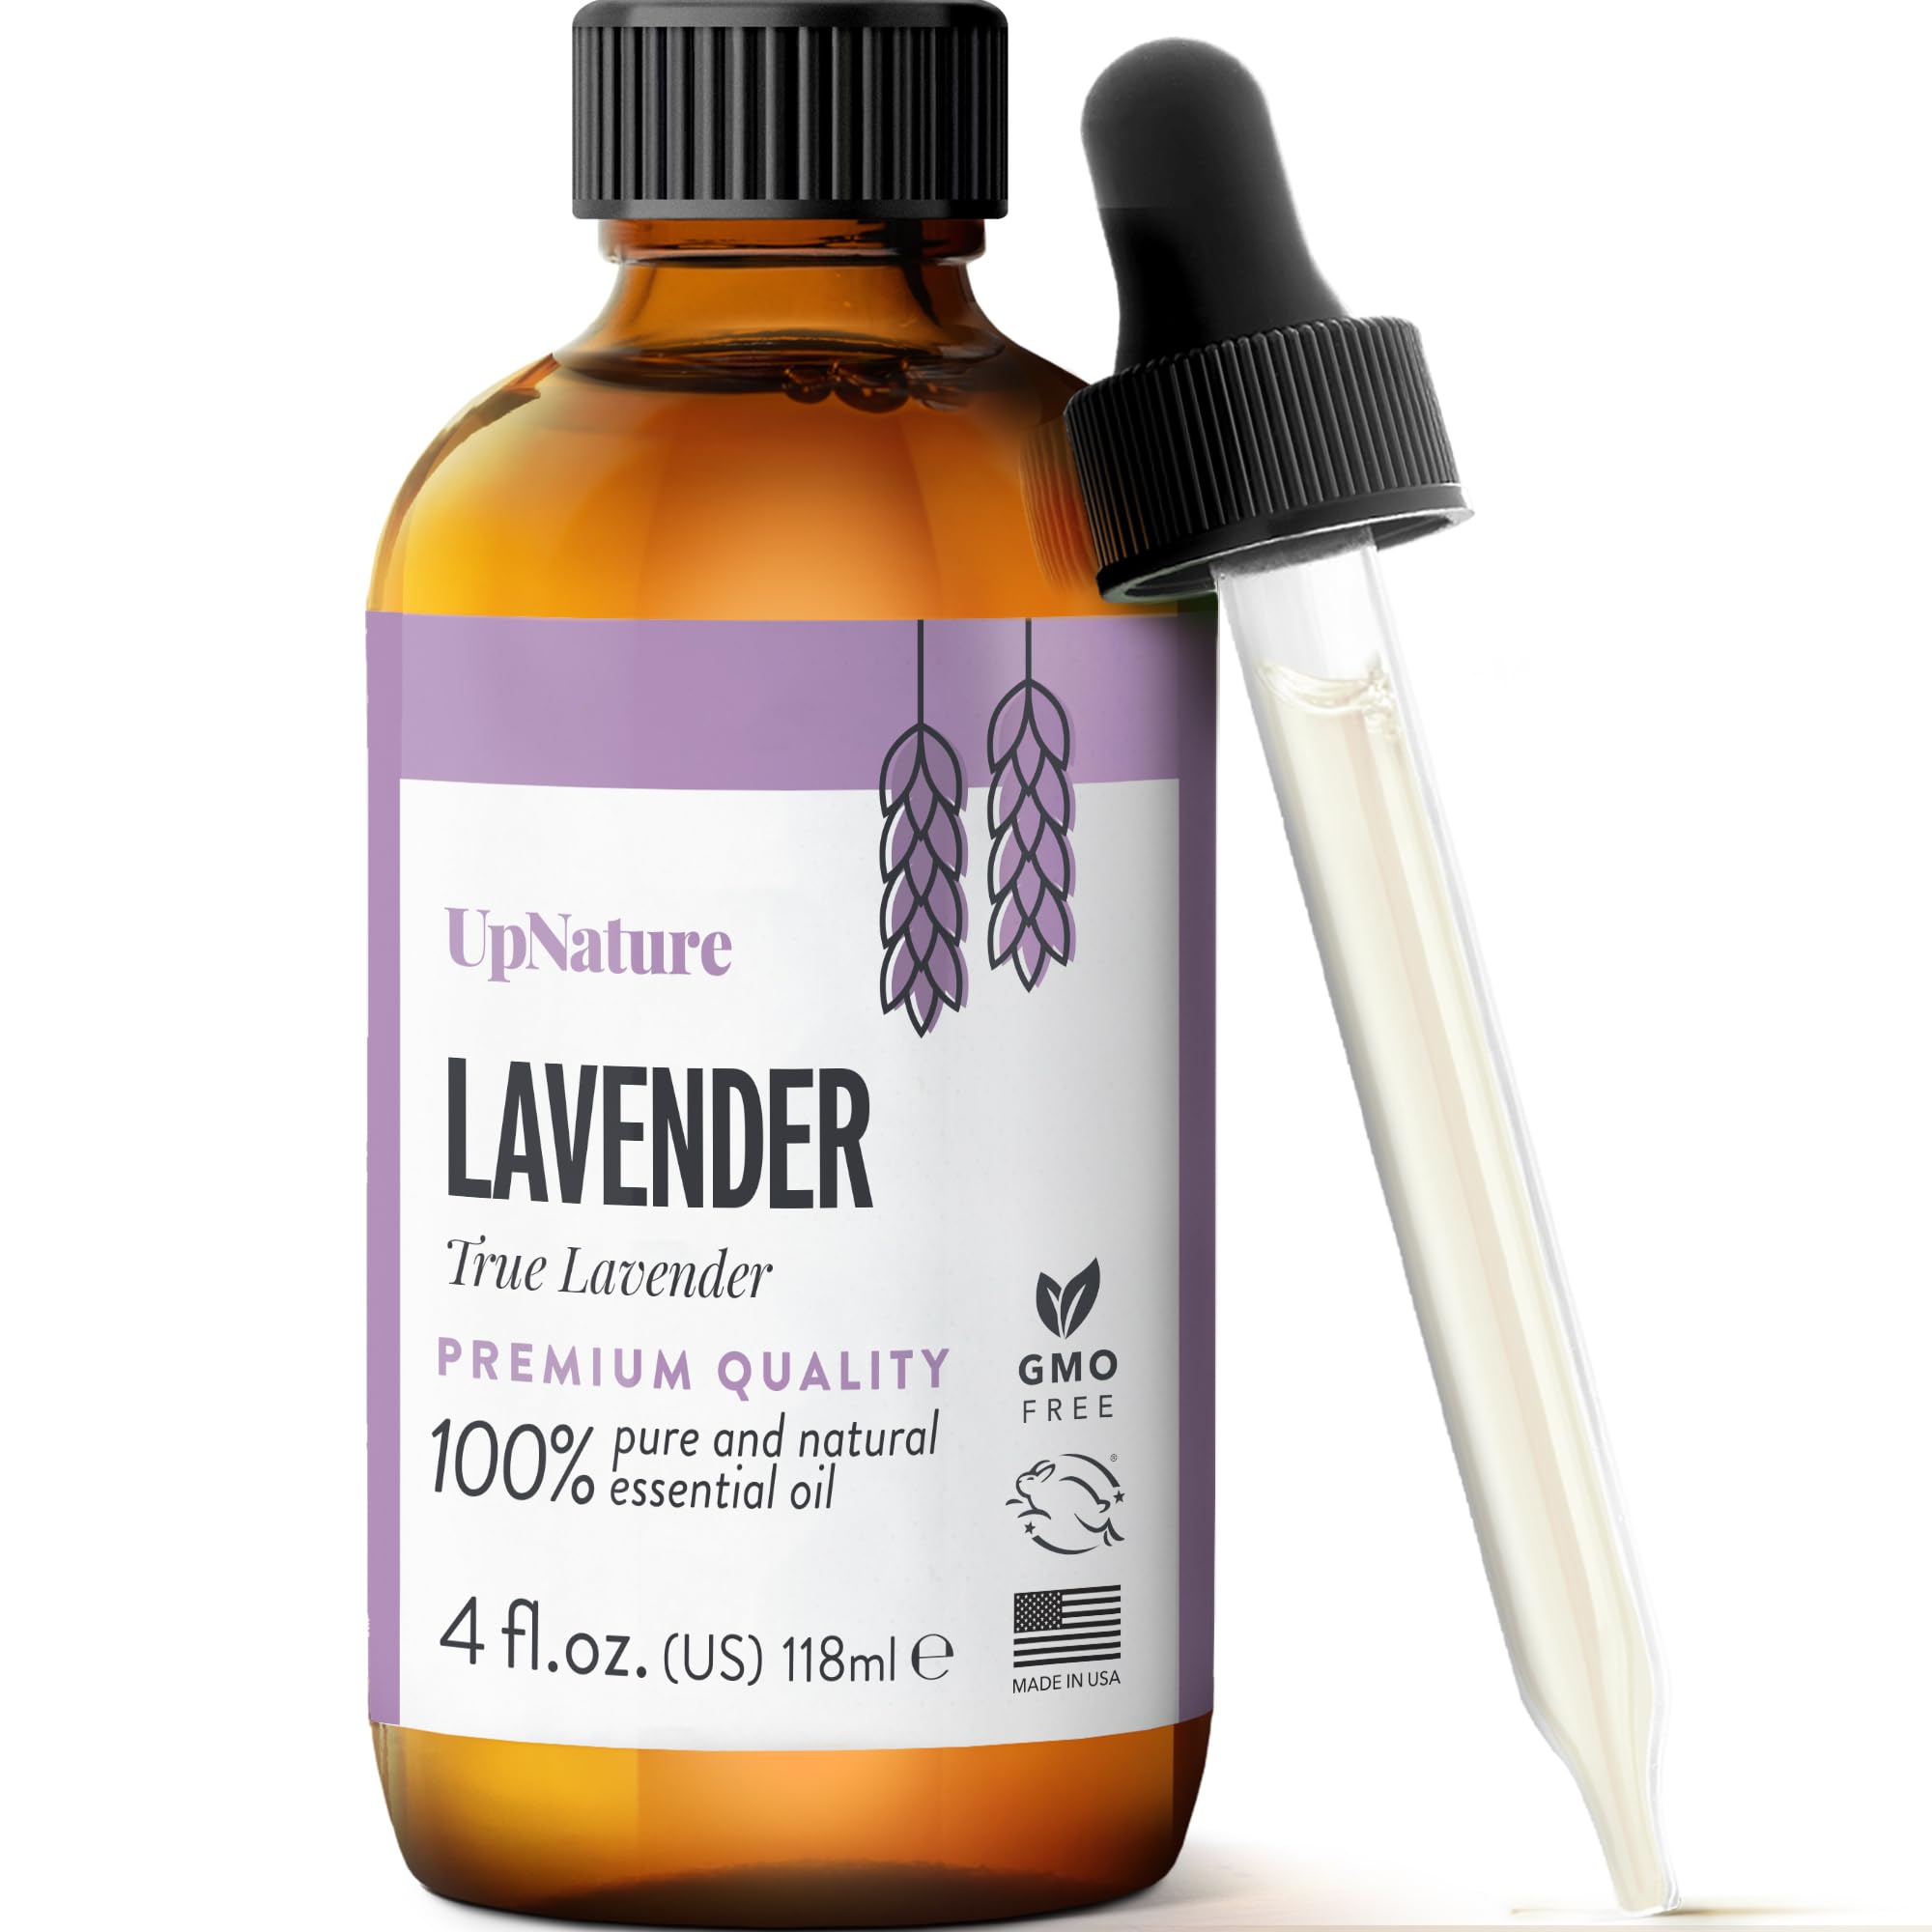 UpNature Lavender Essential Oil Pure - 100% Natural & Pure Lavender Oil - Essential Oils for Diffuser - Diffuser Oil for Aromatherapy - Get Better Sleep - Massage